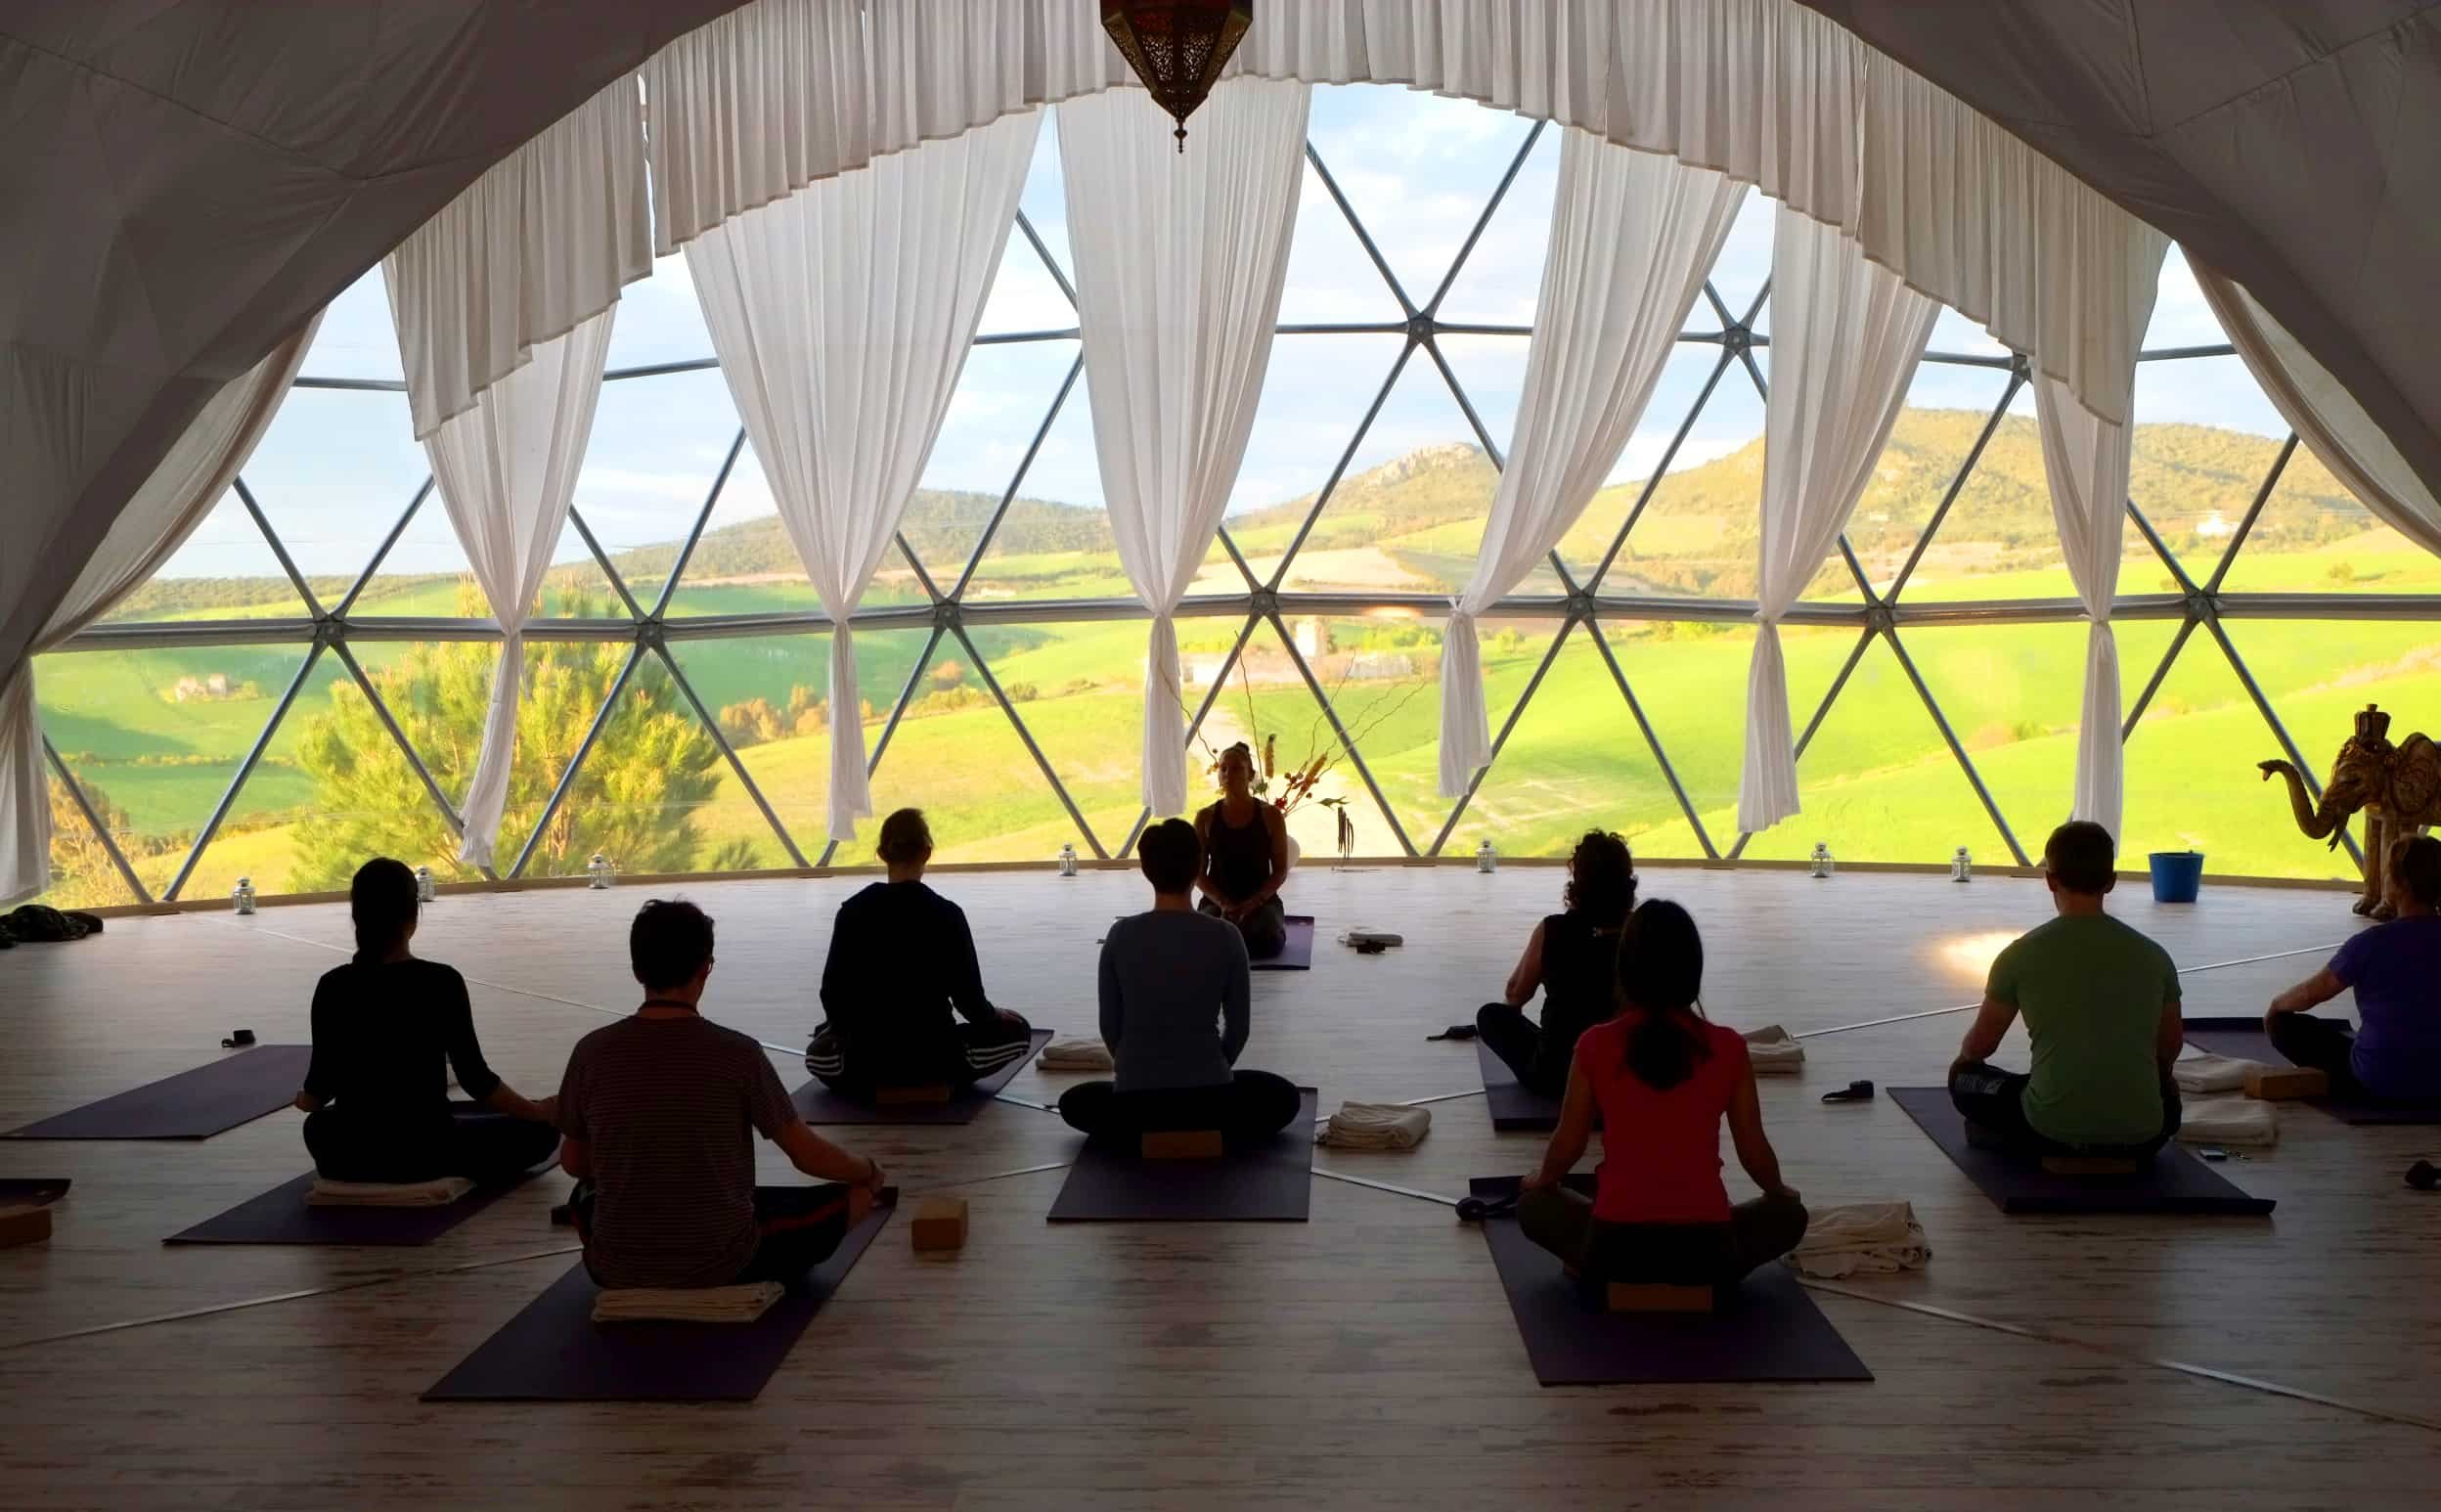 Daily yoga in the Om Dome with views over the Andalusian countryside.jpeg